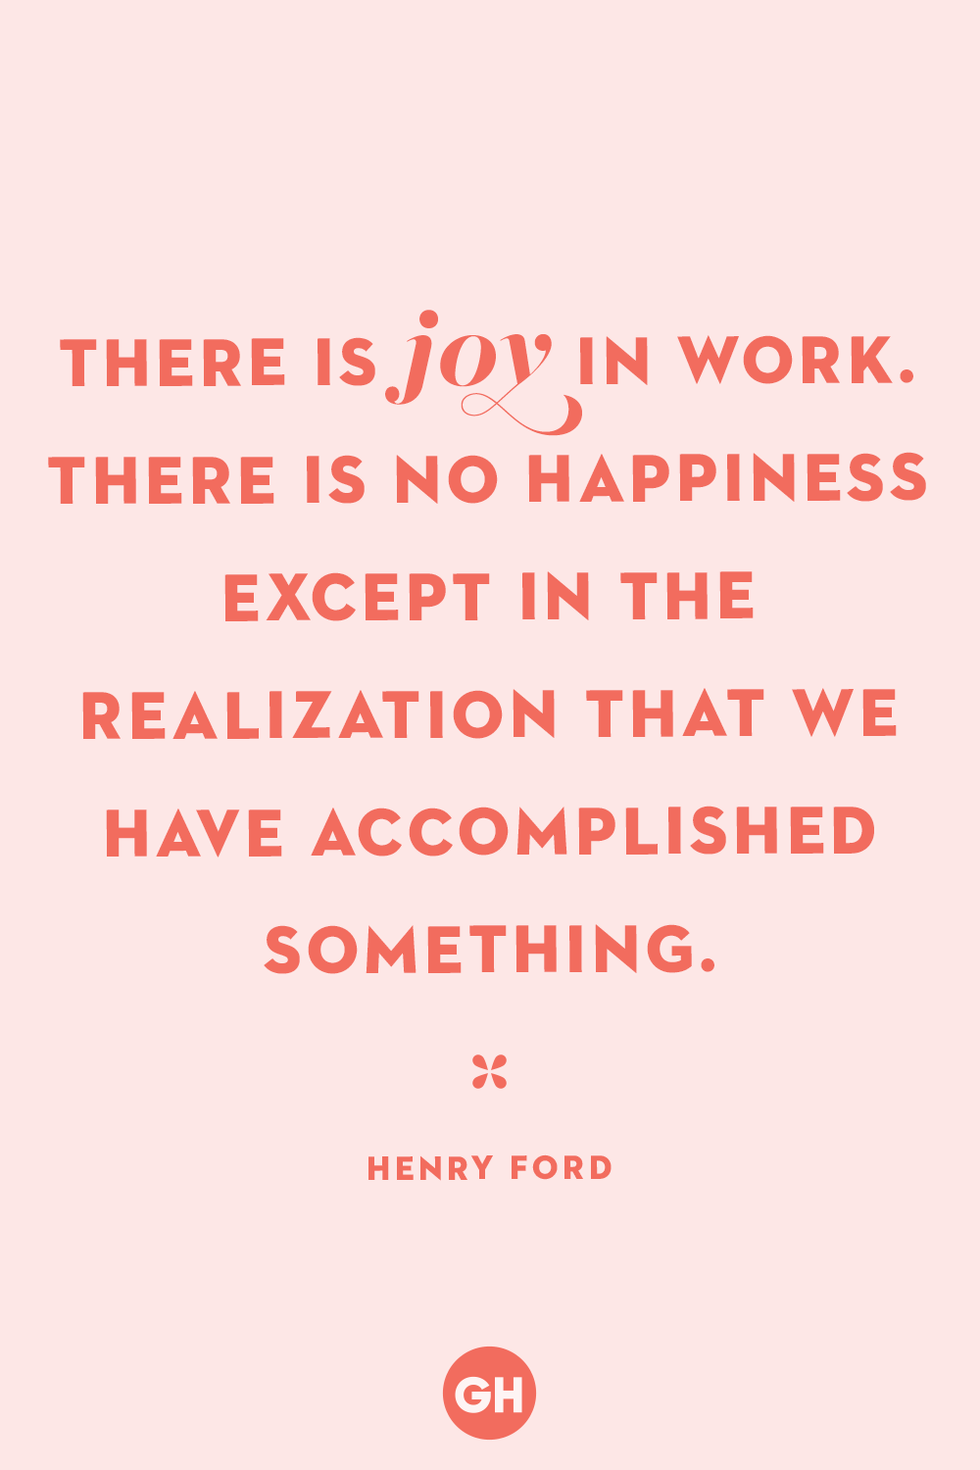 70+ Happy Tuesday Quotes for Motivation & Joy